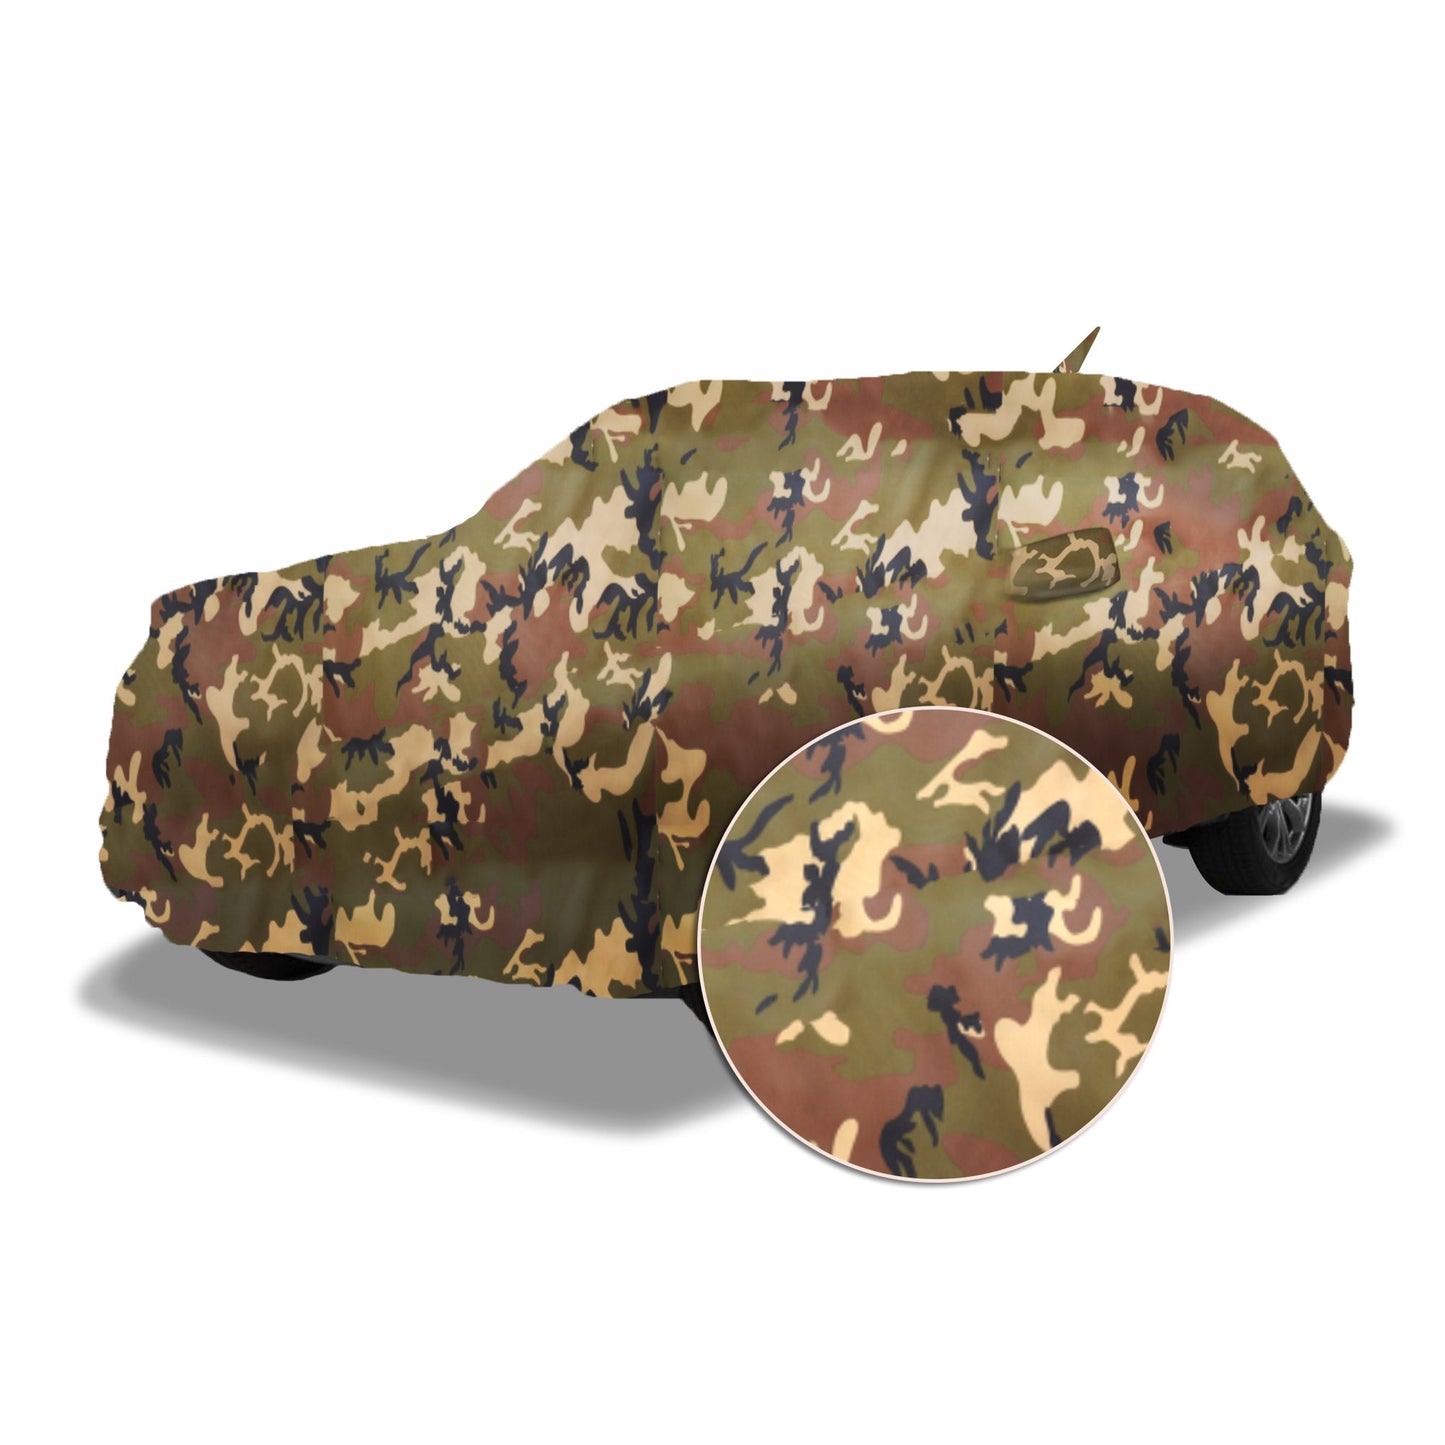 Ascot Mercedes-Benz V-Class 2019-2023 Model Car Body Cover Extra Strong & Dust Proof Jungle Military Car Cover with UV Proof & Water-Resistant Coating